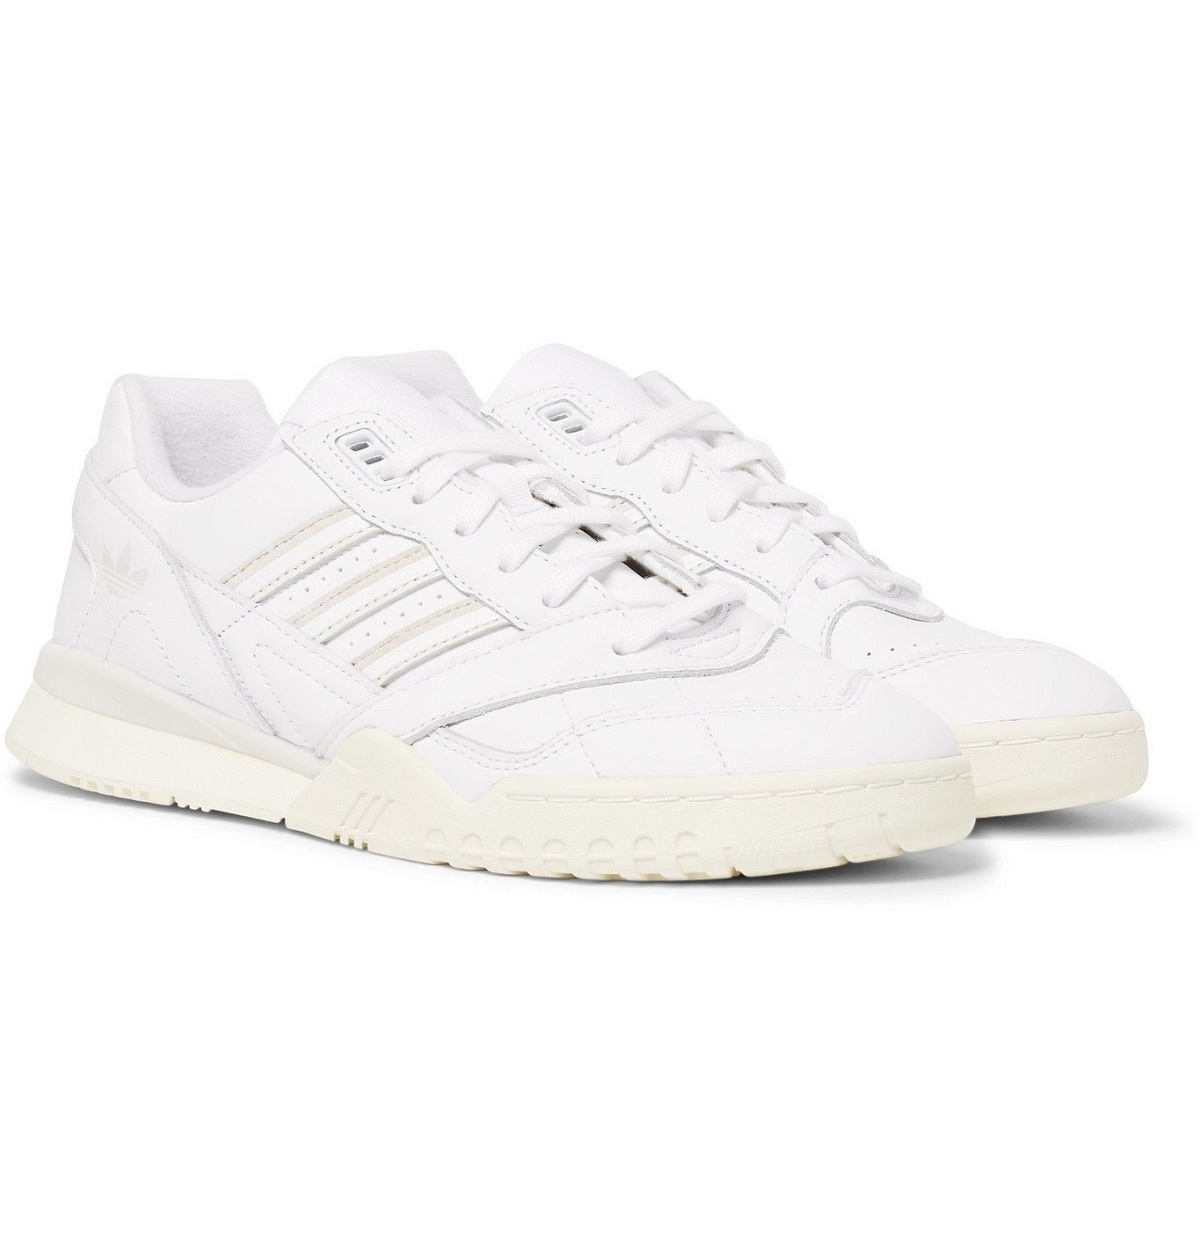 adidas Originals - A.R. Trainer Leather Sneakers - adidas Originals by Alexander Wang